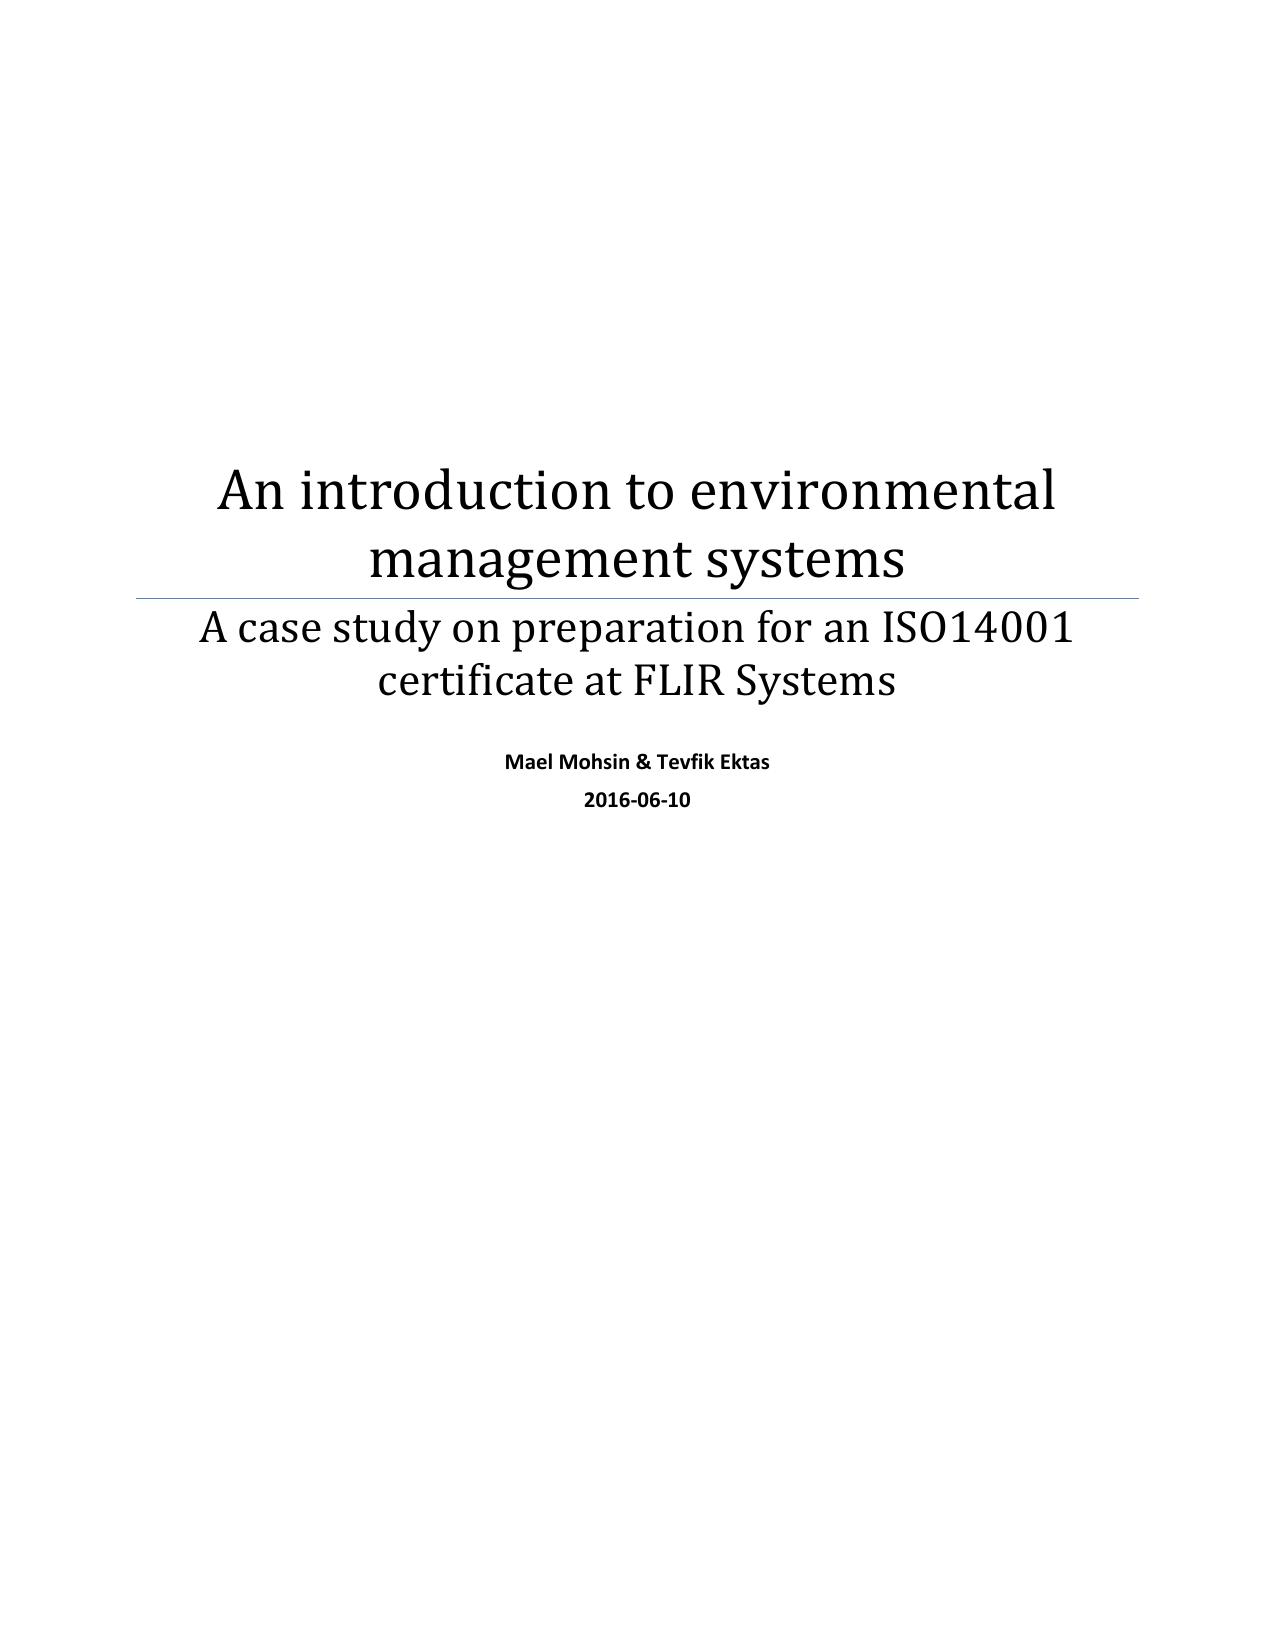 An introduction to environmental management systems